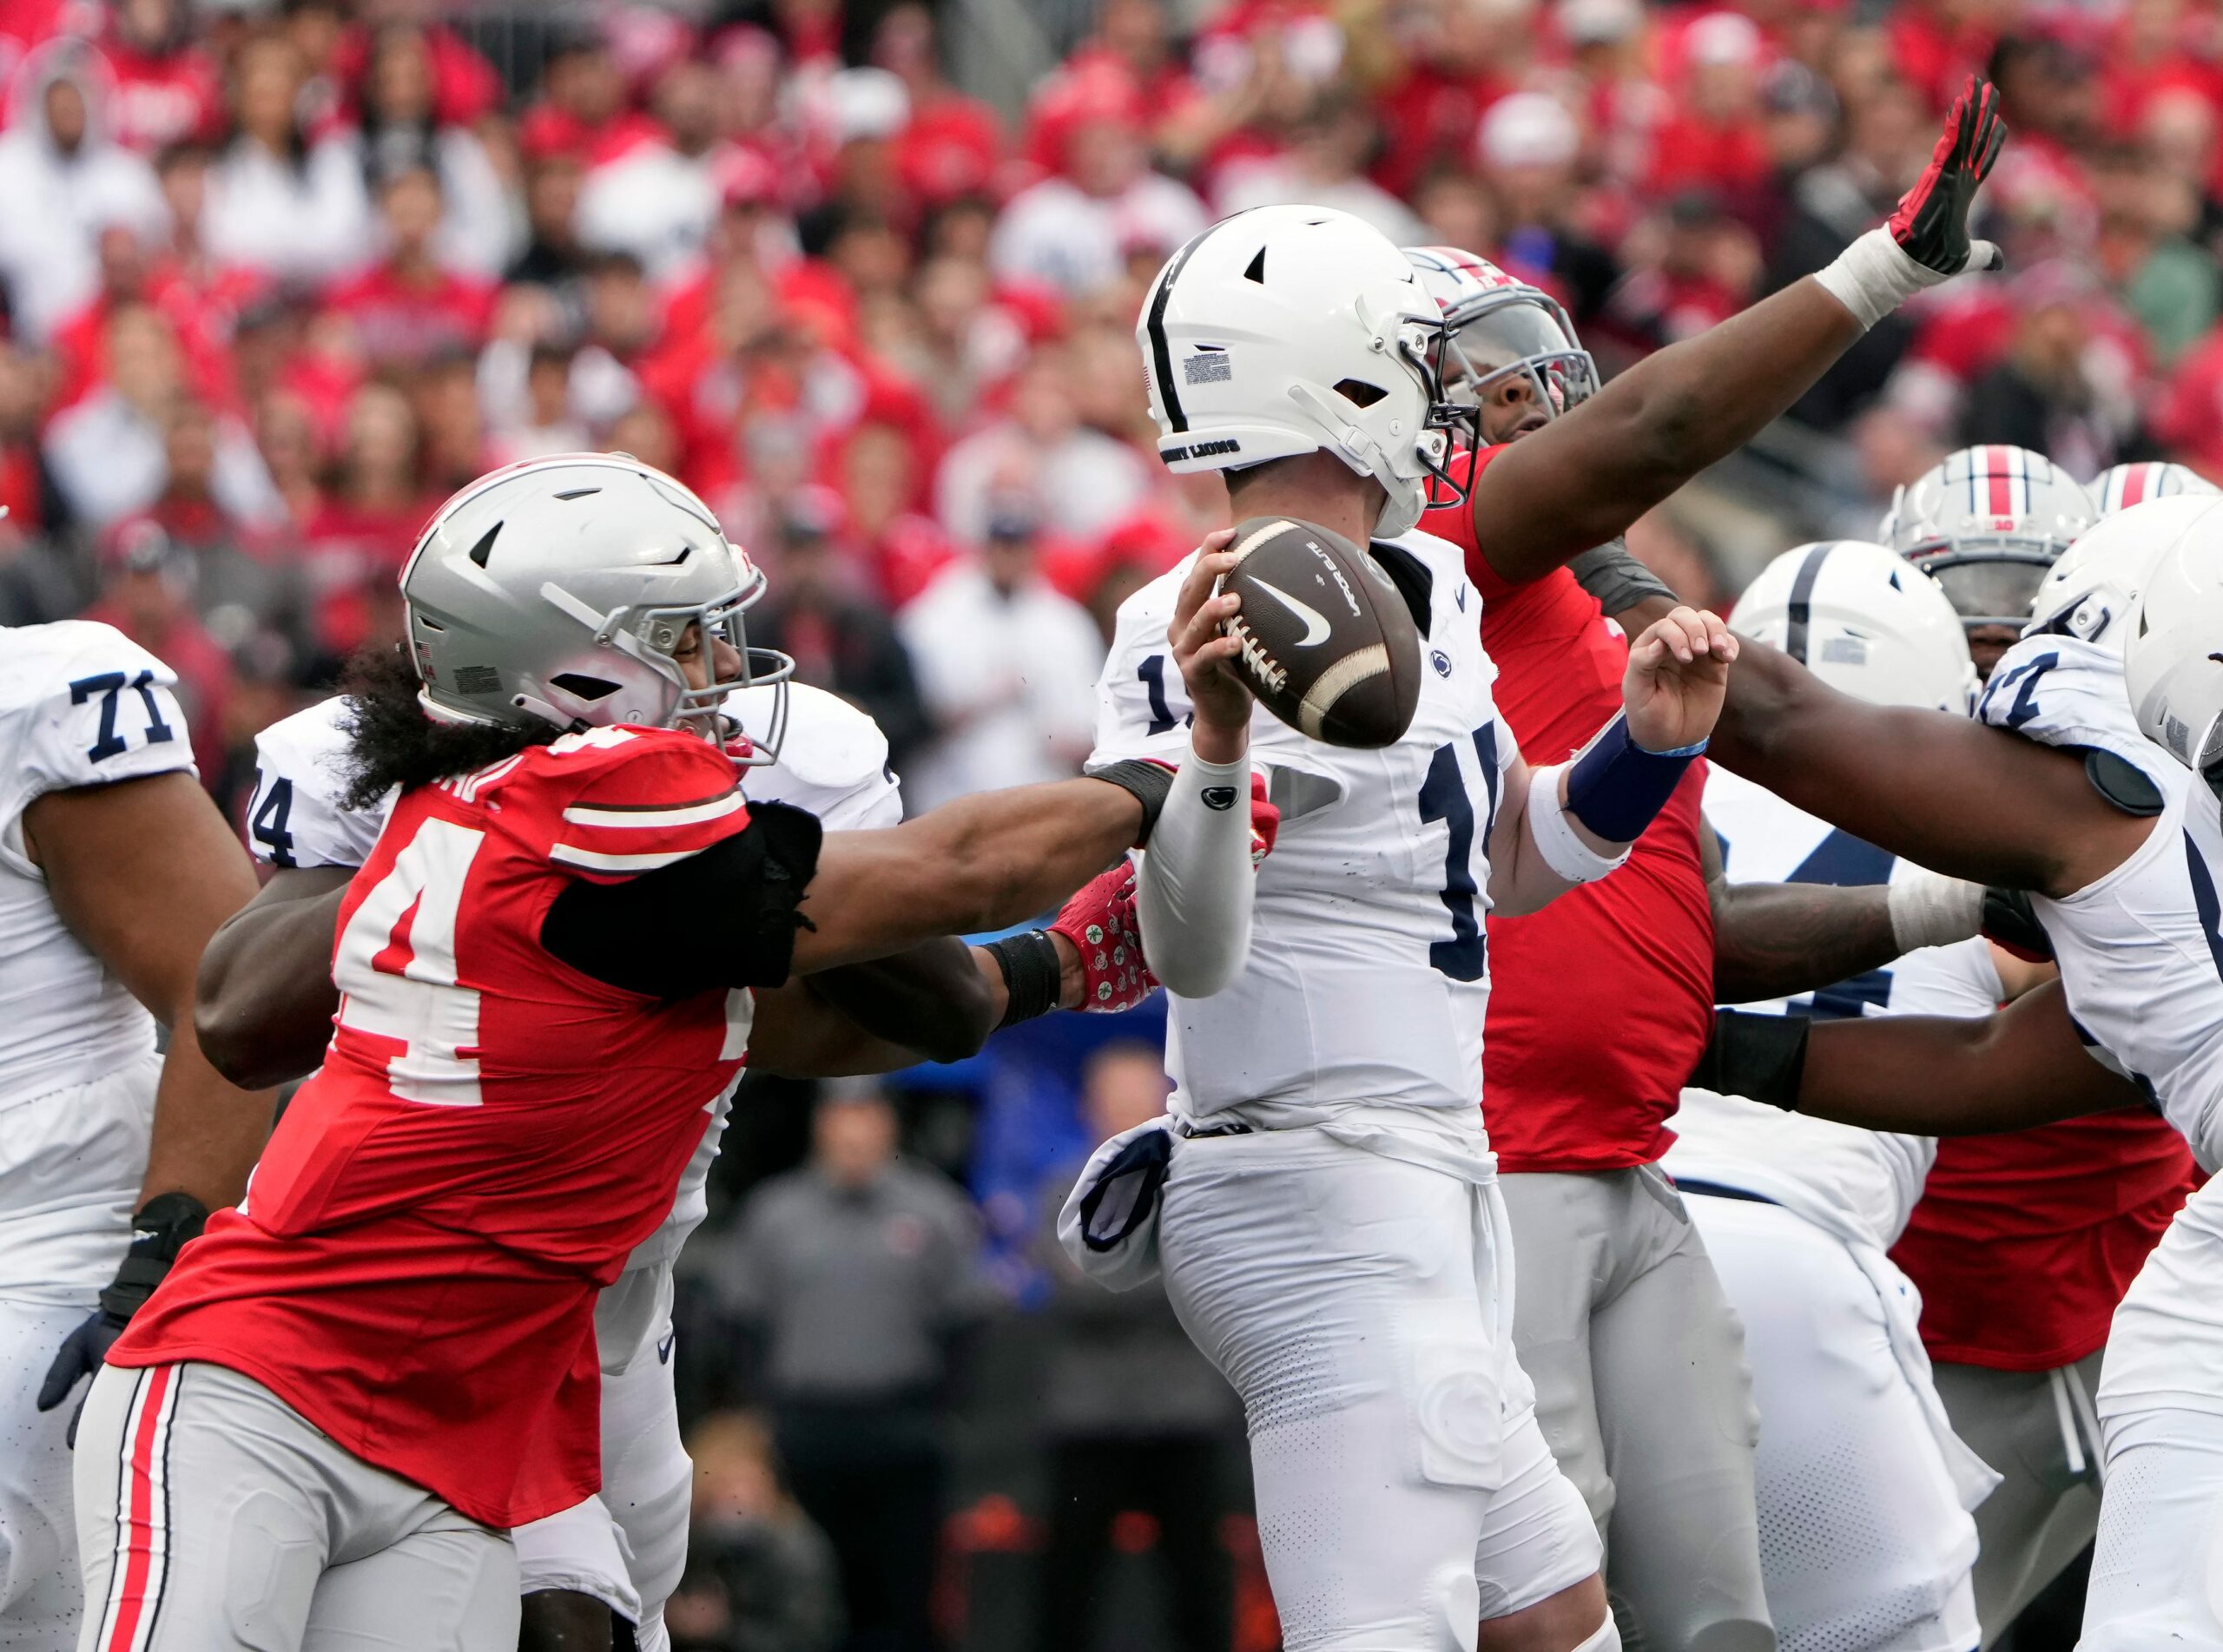 Ohio State dominated Penn State offensive tackle Olu Fashanu, and this stat backs it up